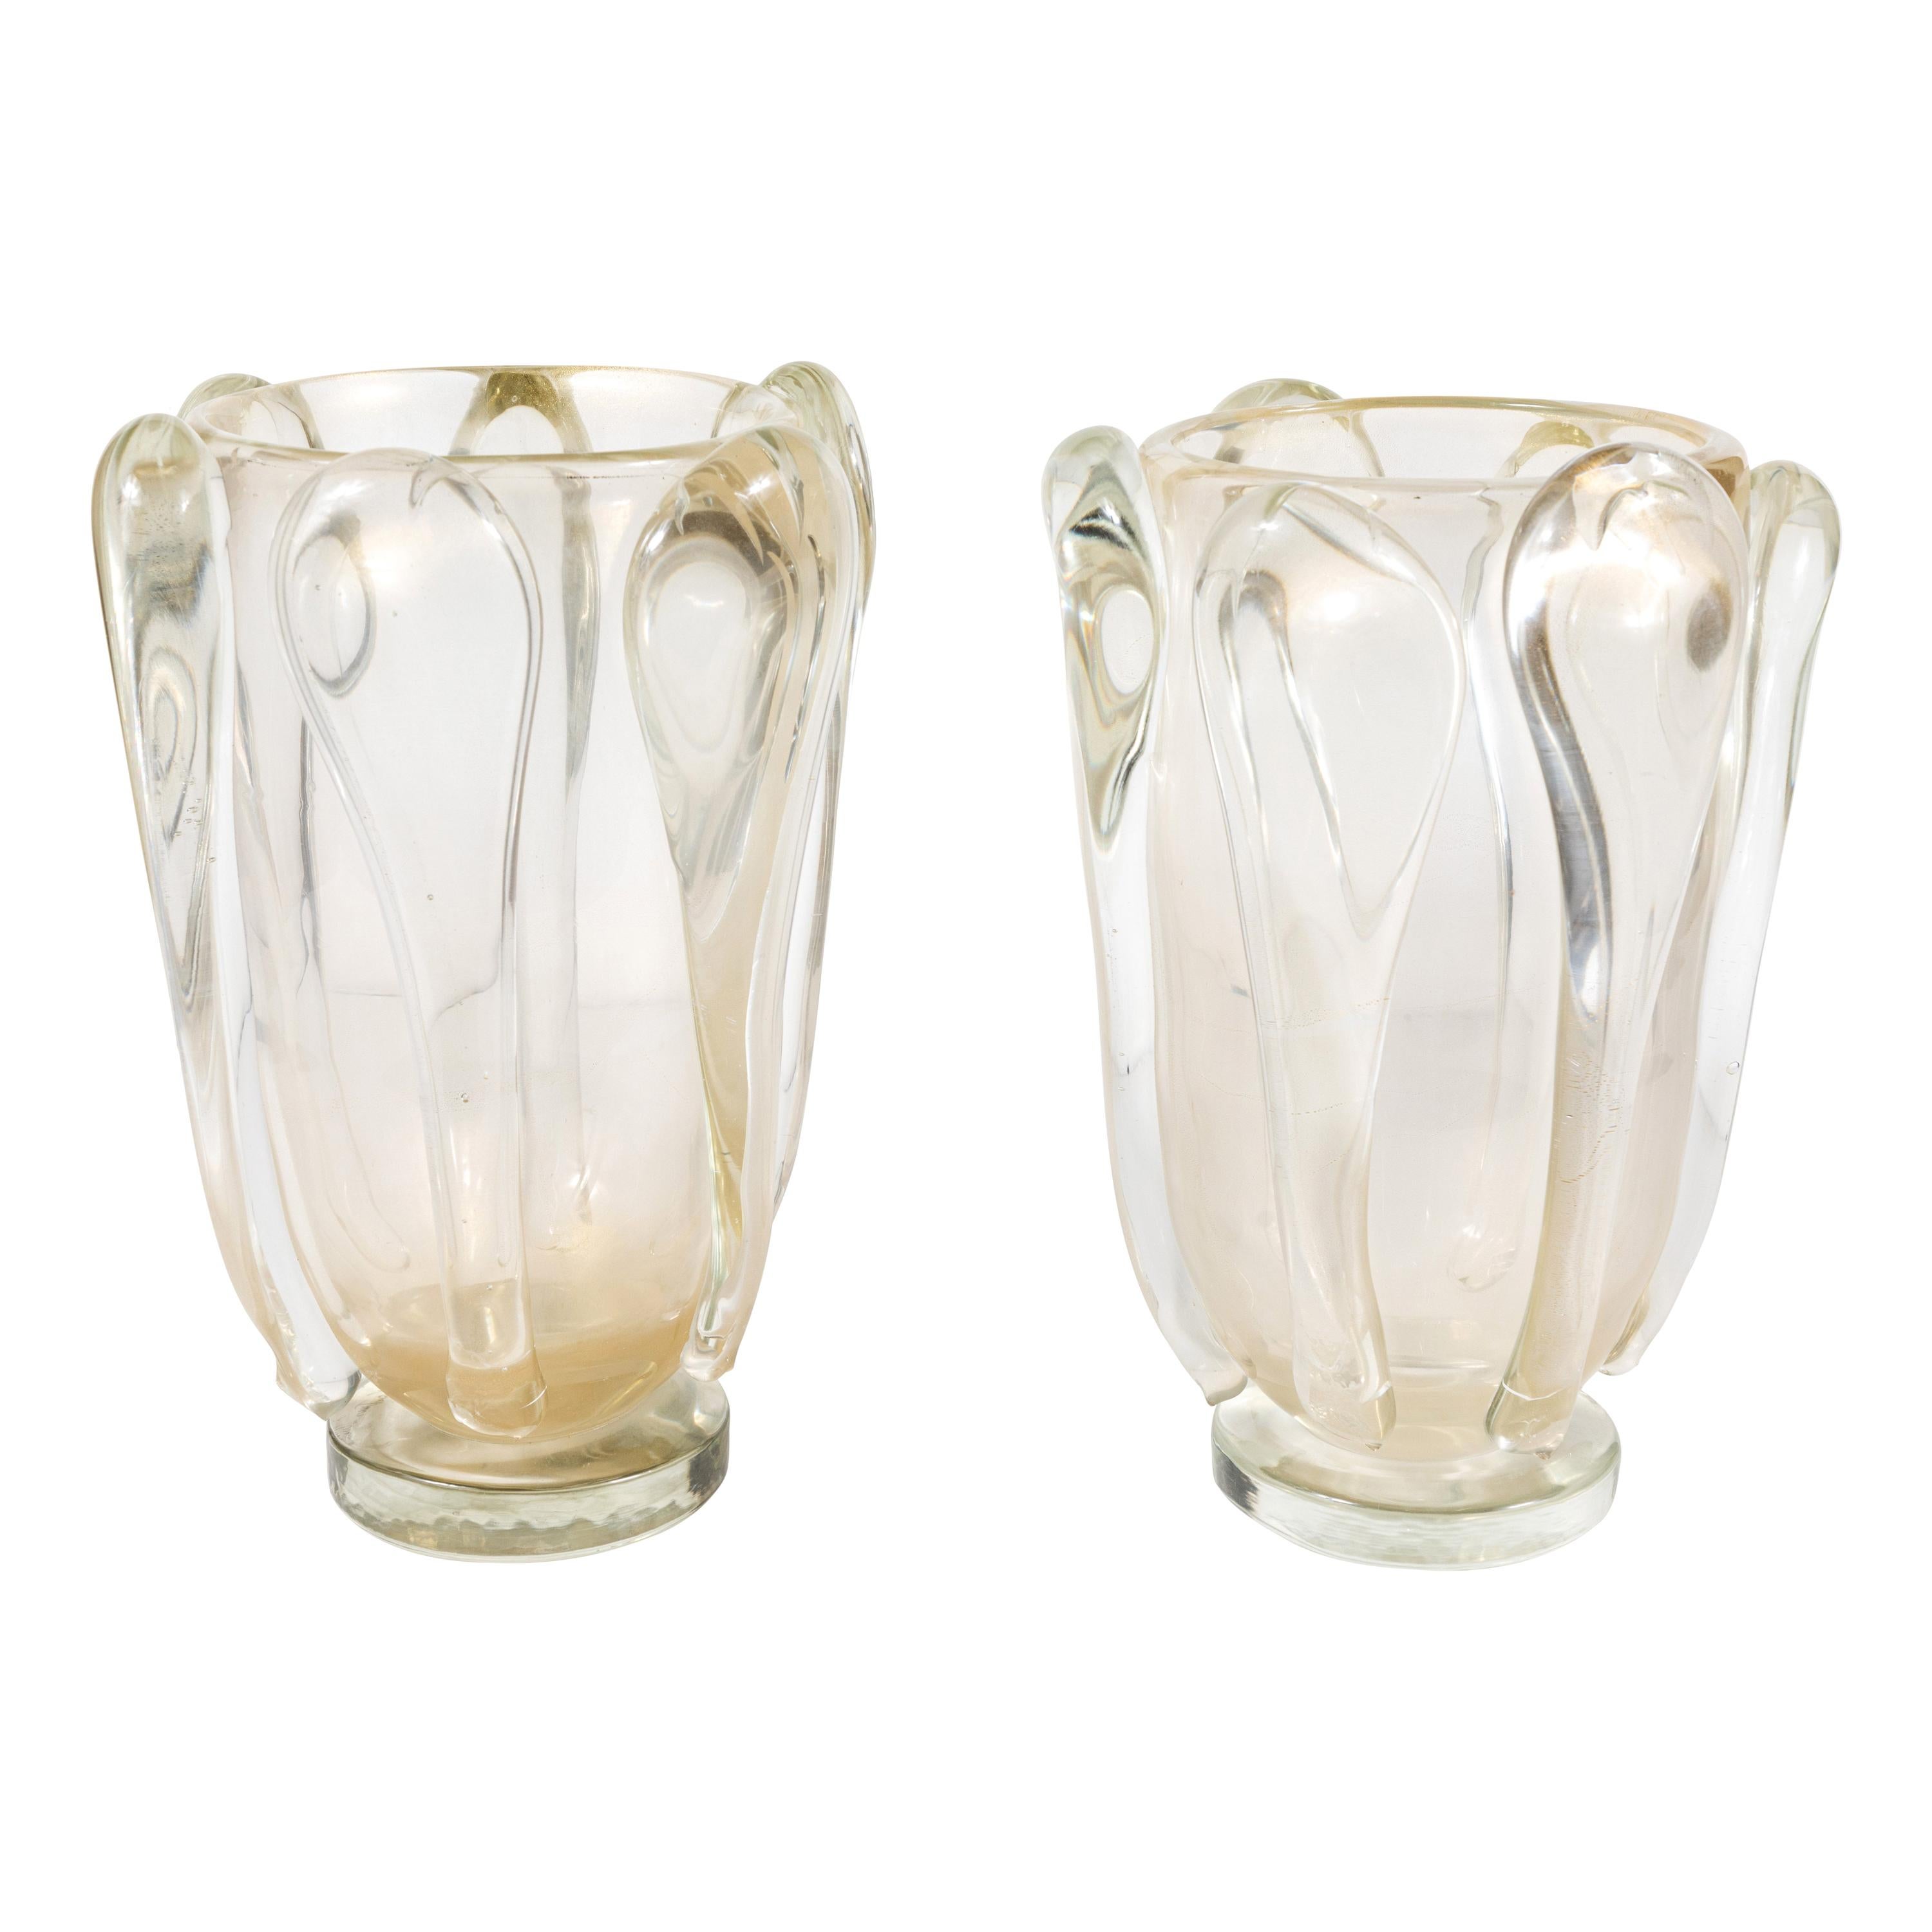 Signed Pair of Gold Flecked, Murano Vases